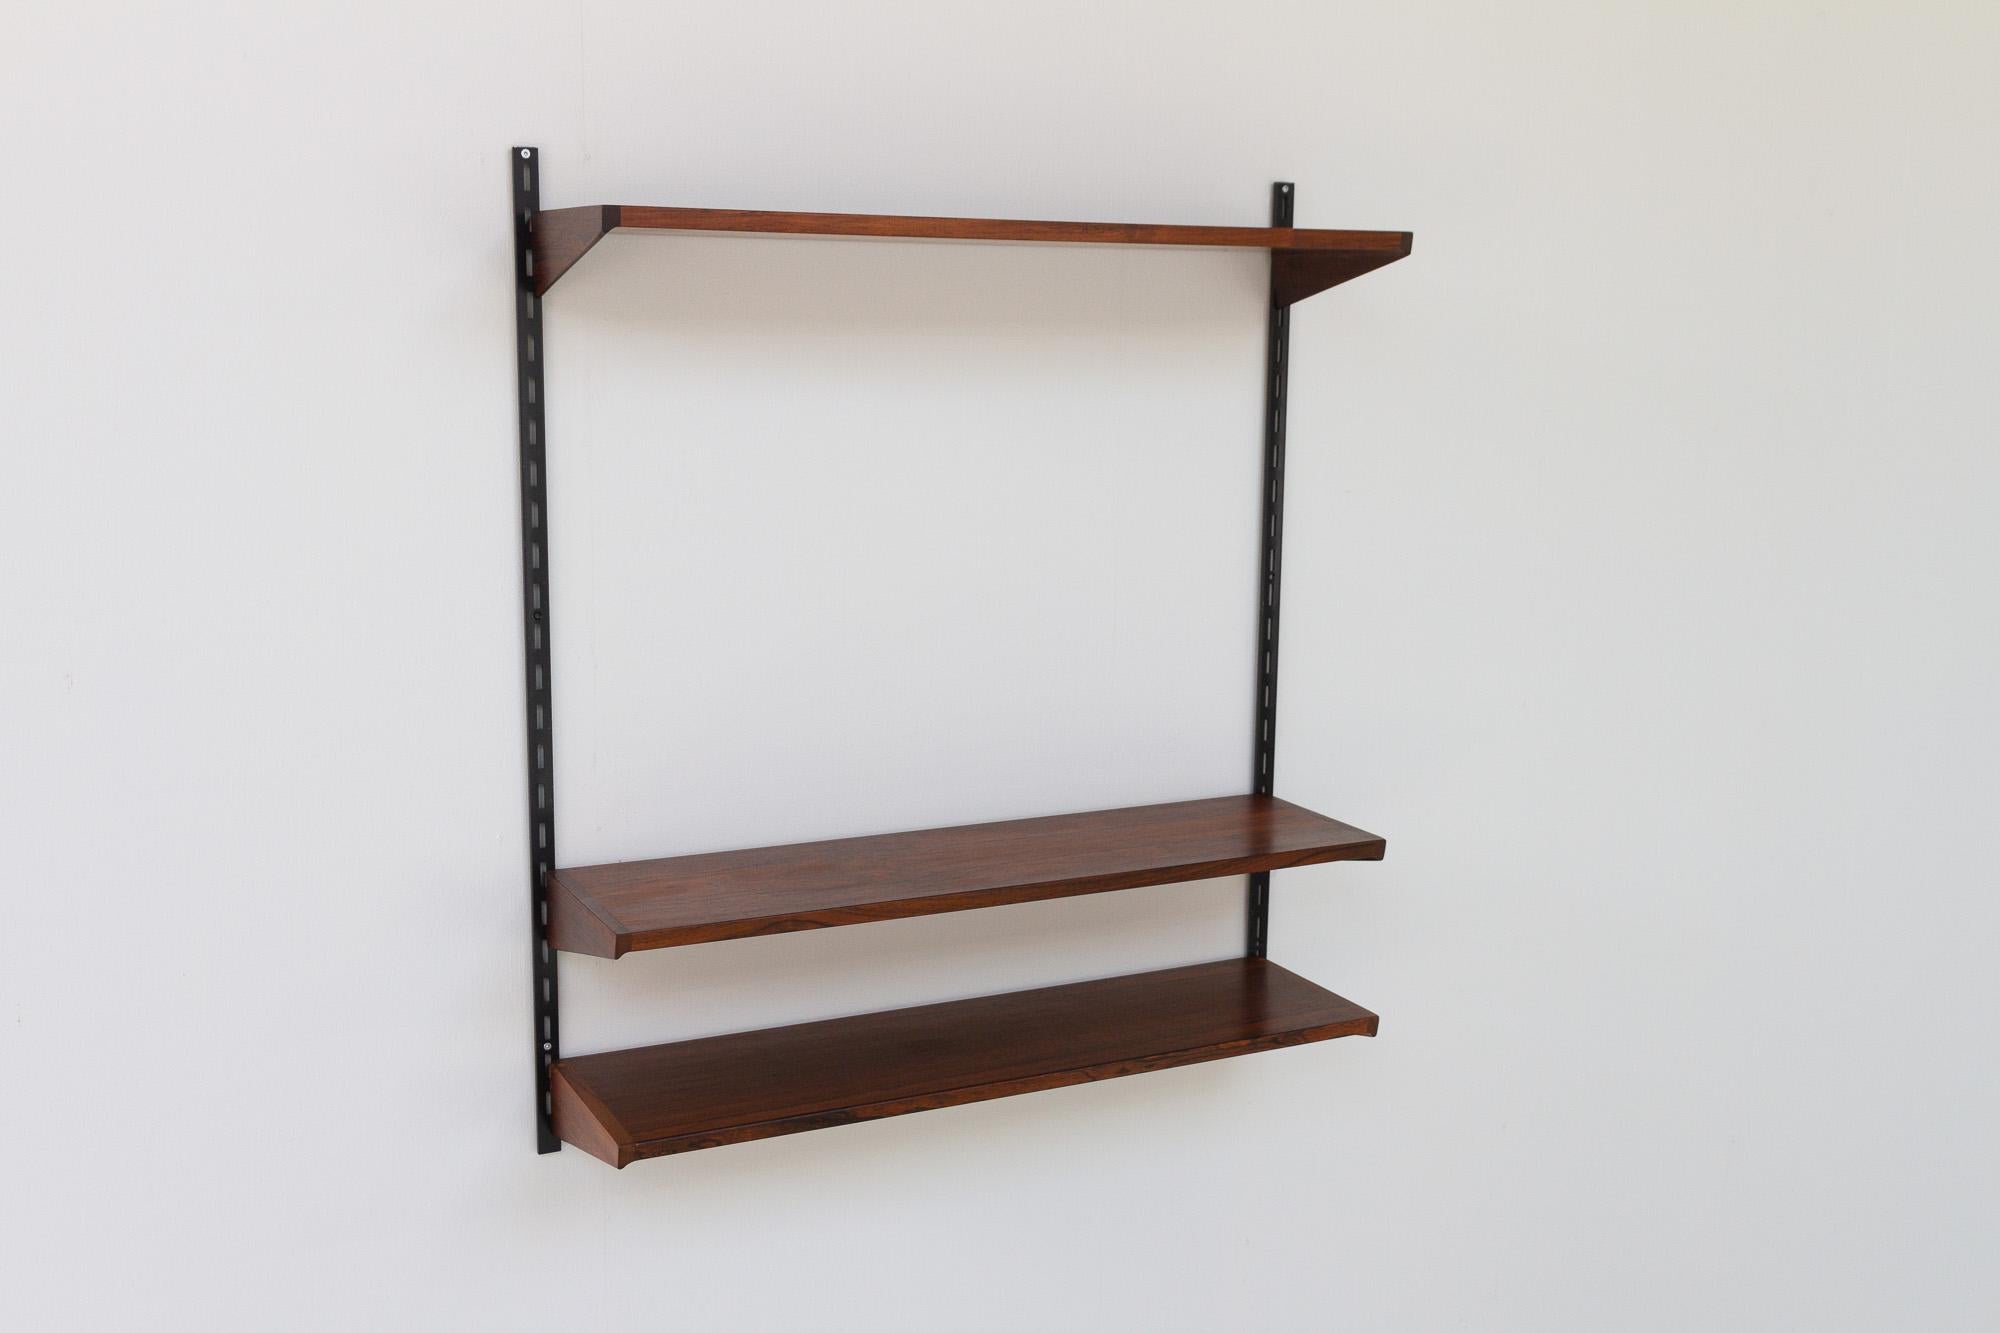 Vintage Danish Rosewood Wall Unit by Kai Kristiansen for FM, 1960s For Sale 19